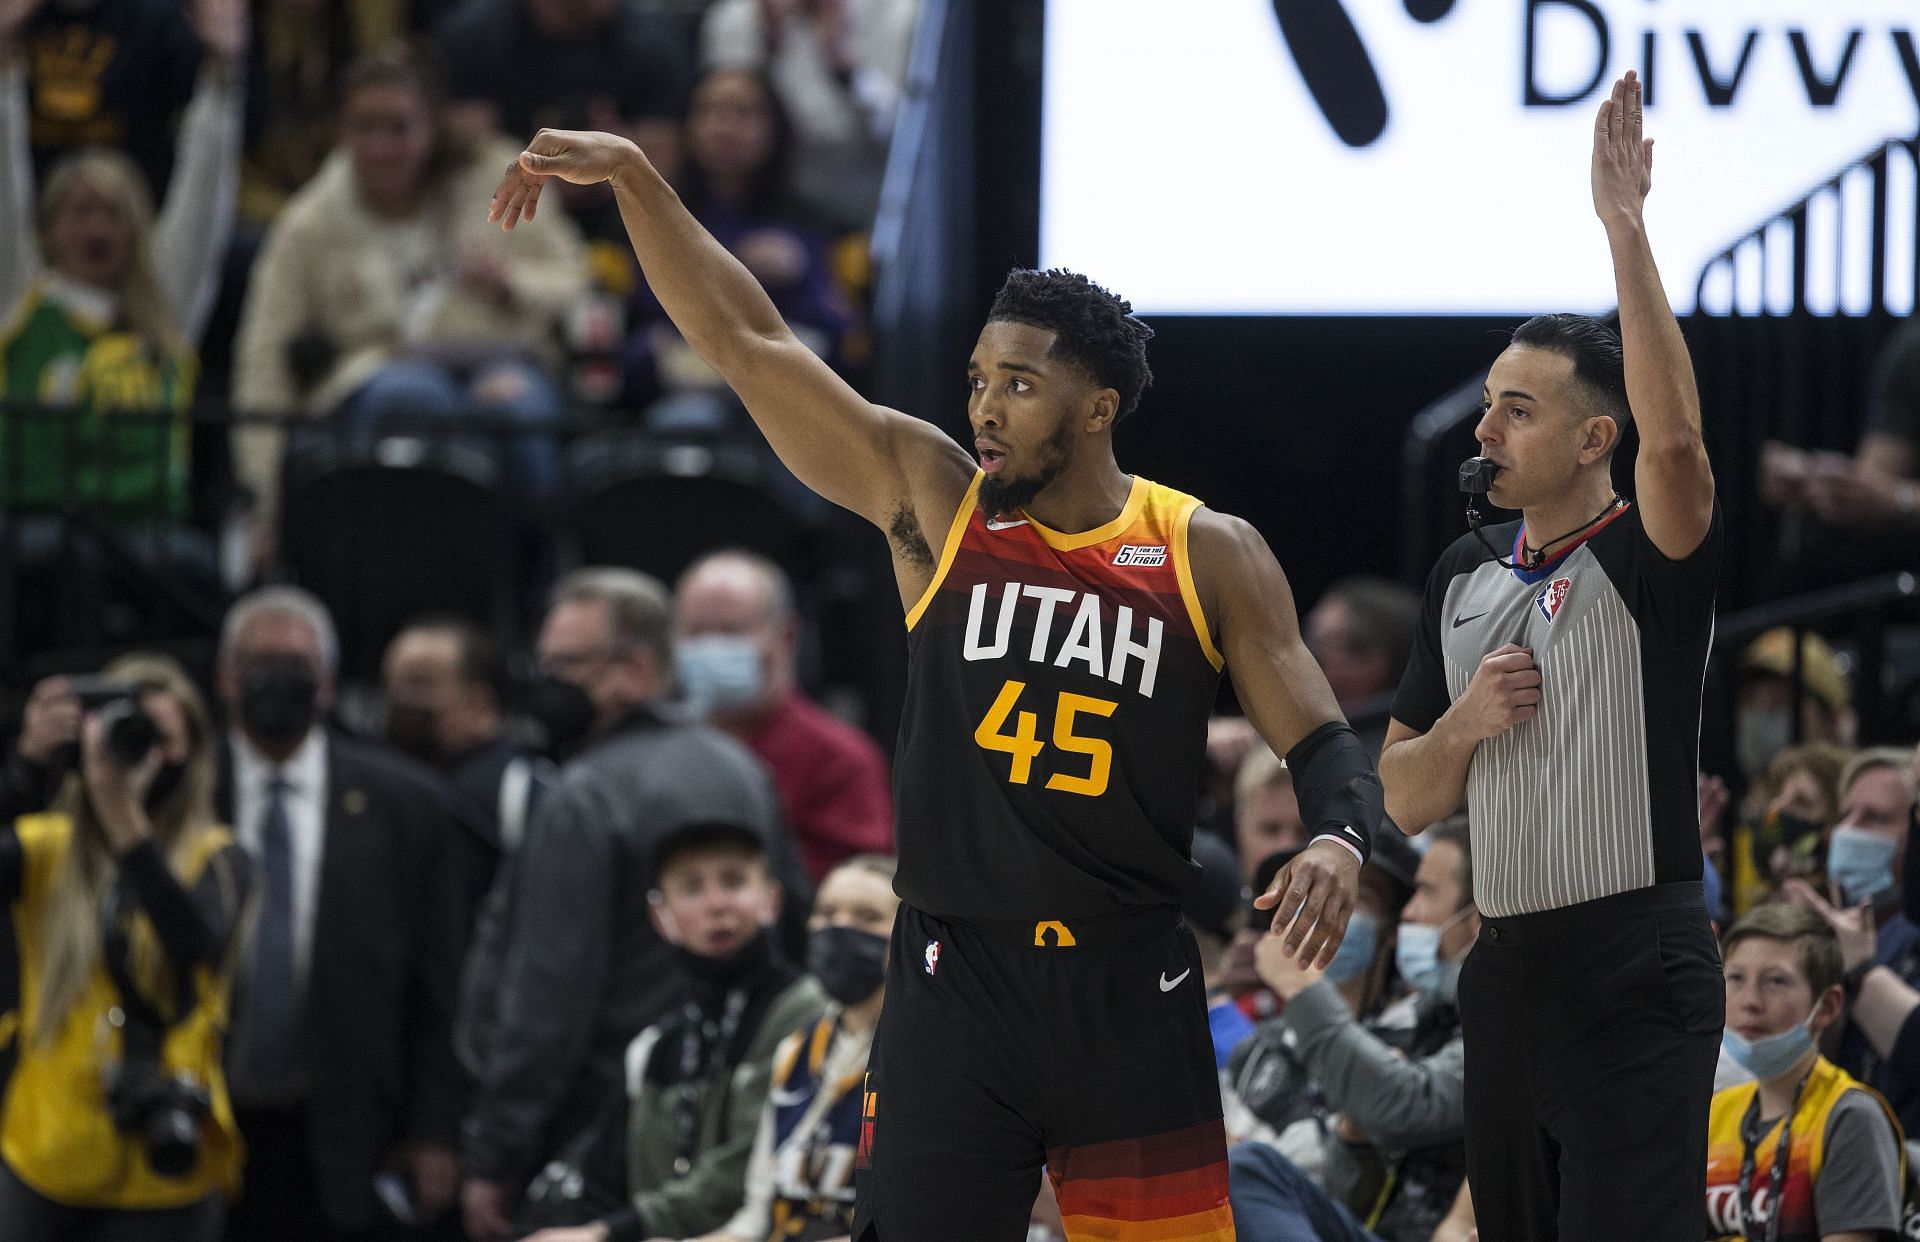 Donovan Mitchell #45 of the Utah Jazz reacts as he watches a shot go in the basket agaisnt the Brooklyn Nets during the second half of their game February 4, 2022 at the Vivint Smart Home Arena in Salt Lake City, Utah.